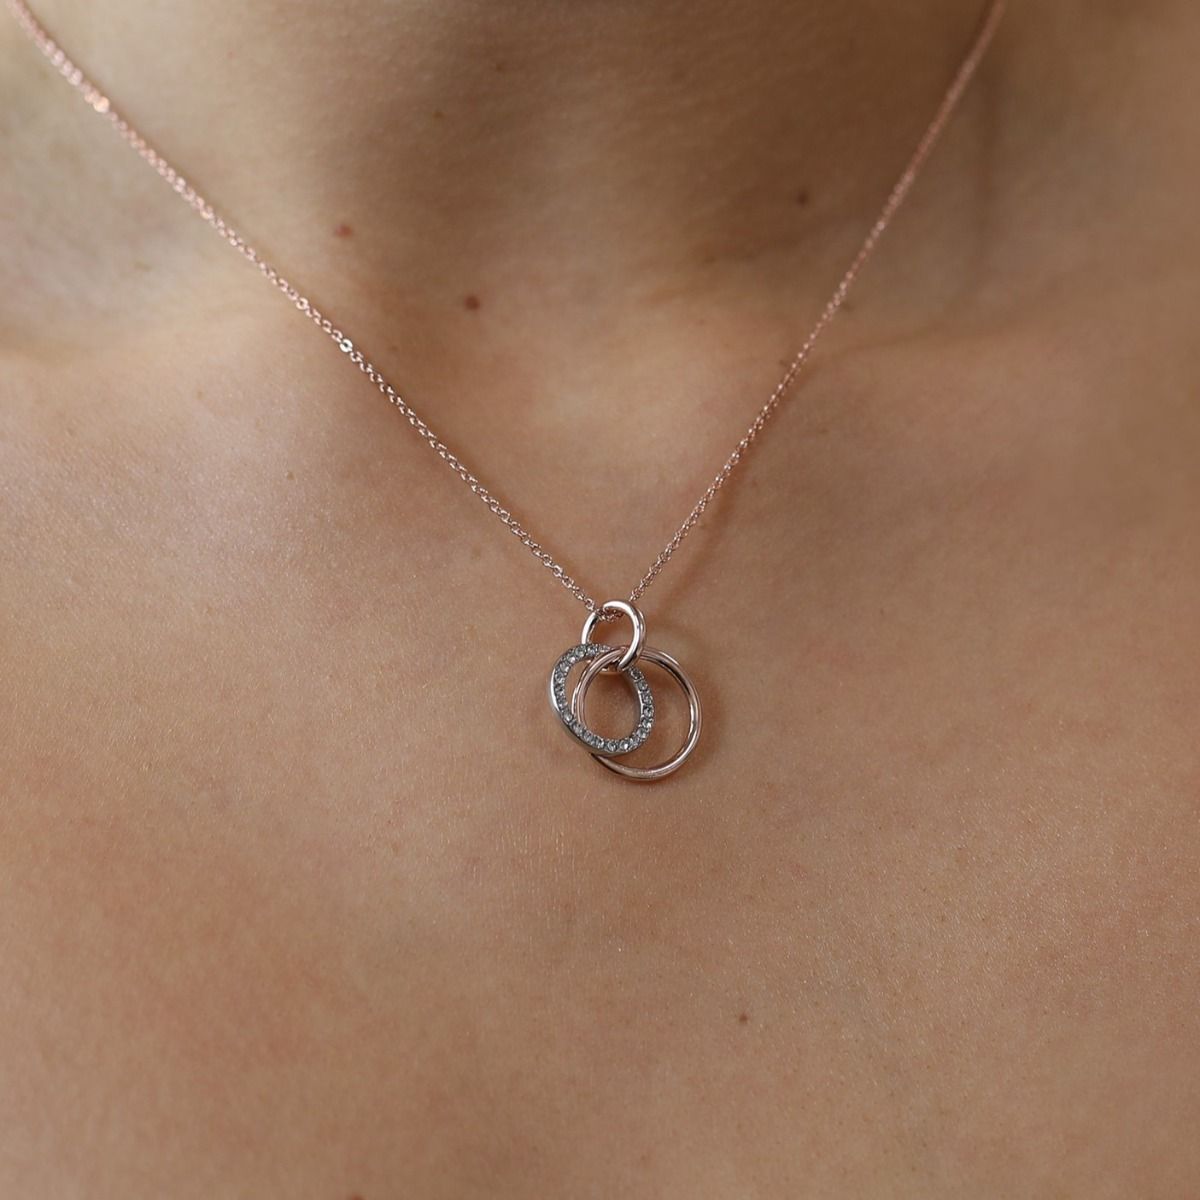 This crystal and polished two-tone pendant encapsulates sophistication with its classic design and modern twist. It effortlessly pairs together rhodium and rose gold hoops, which are finished off with crystals. 